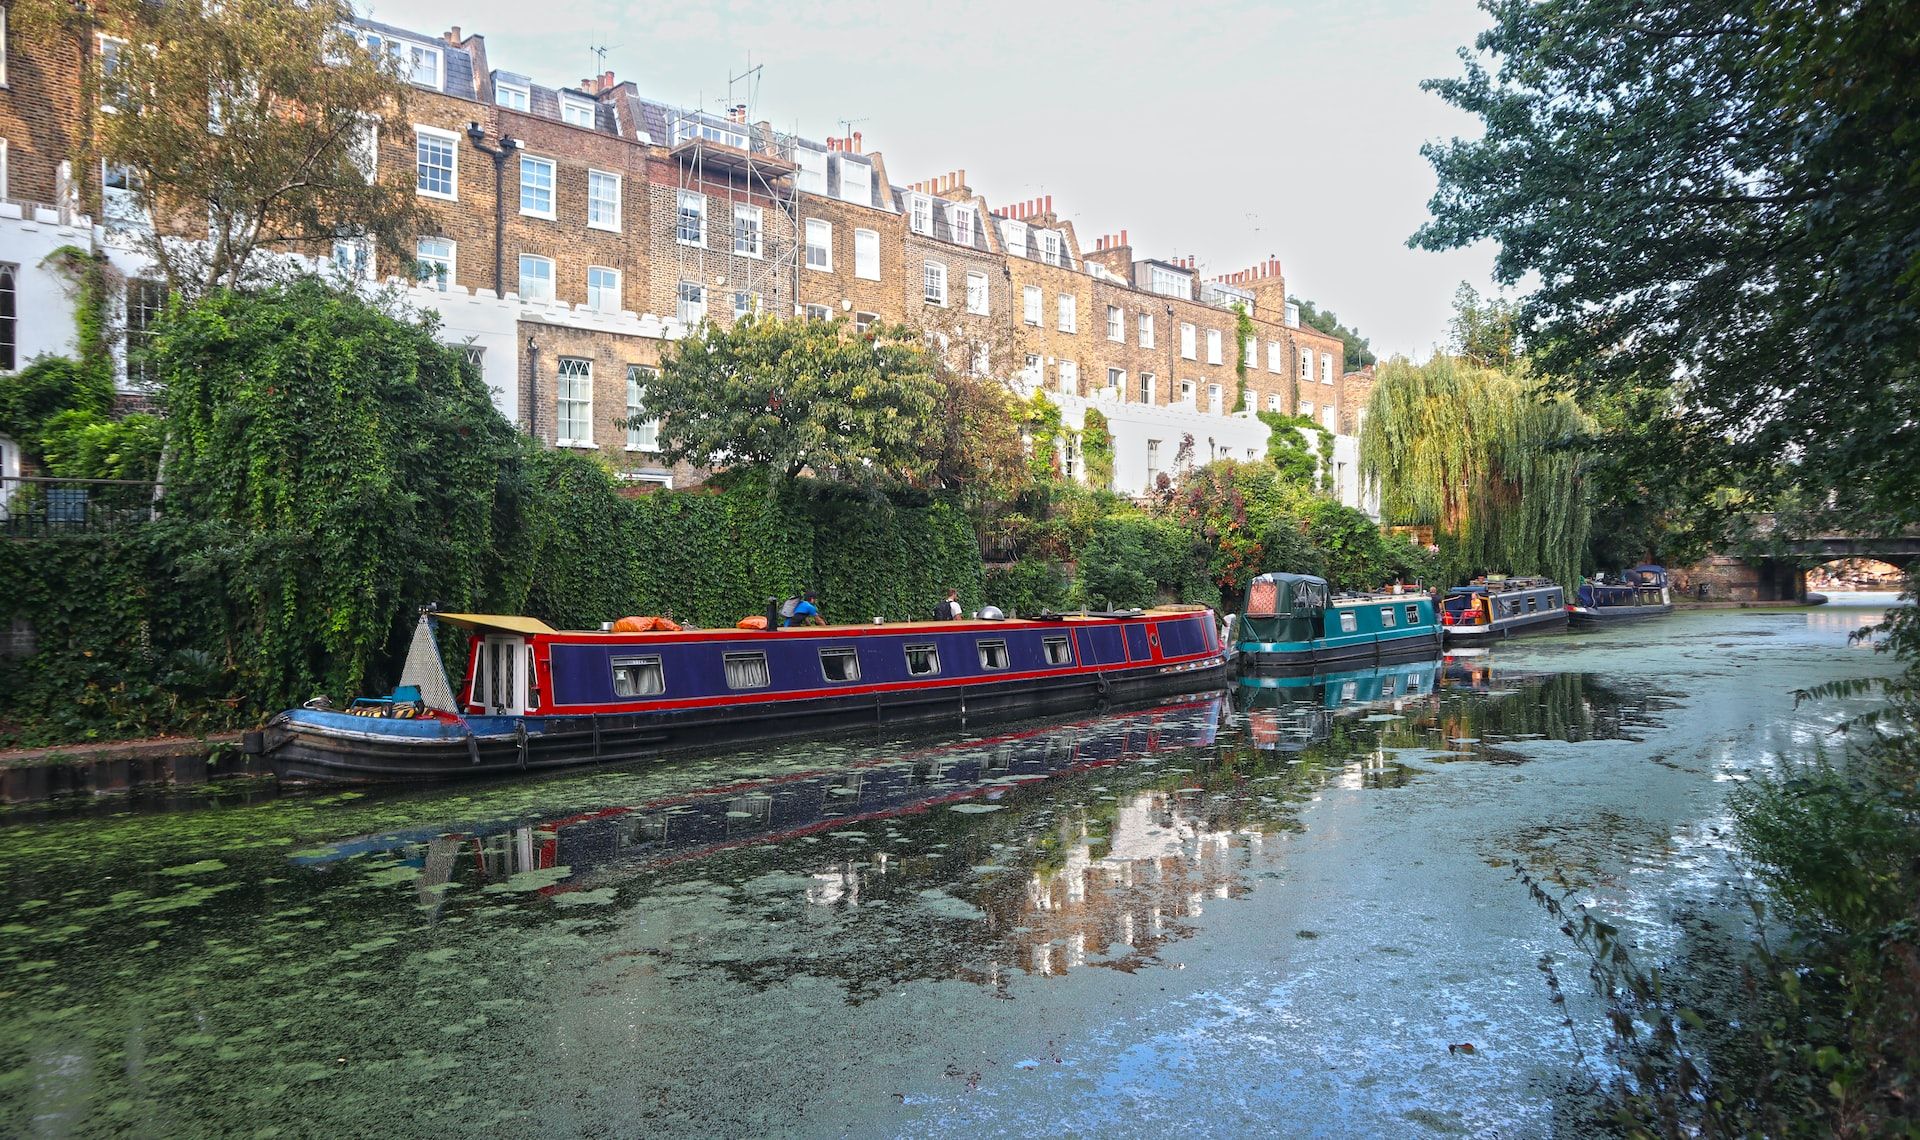 Discovering residential properties in Islington